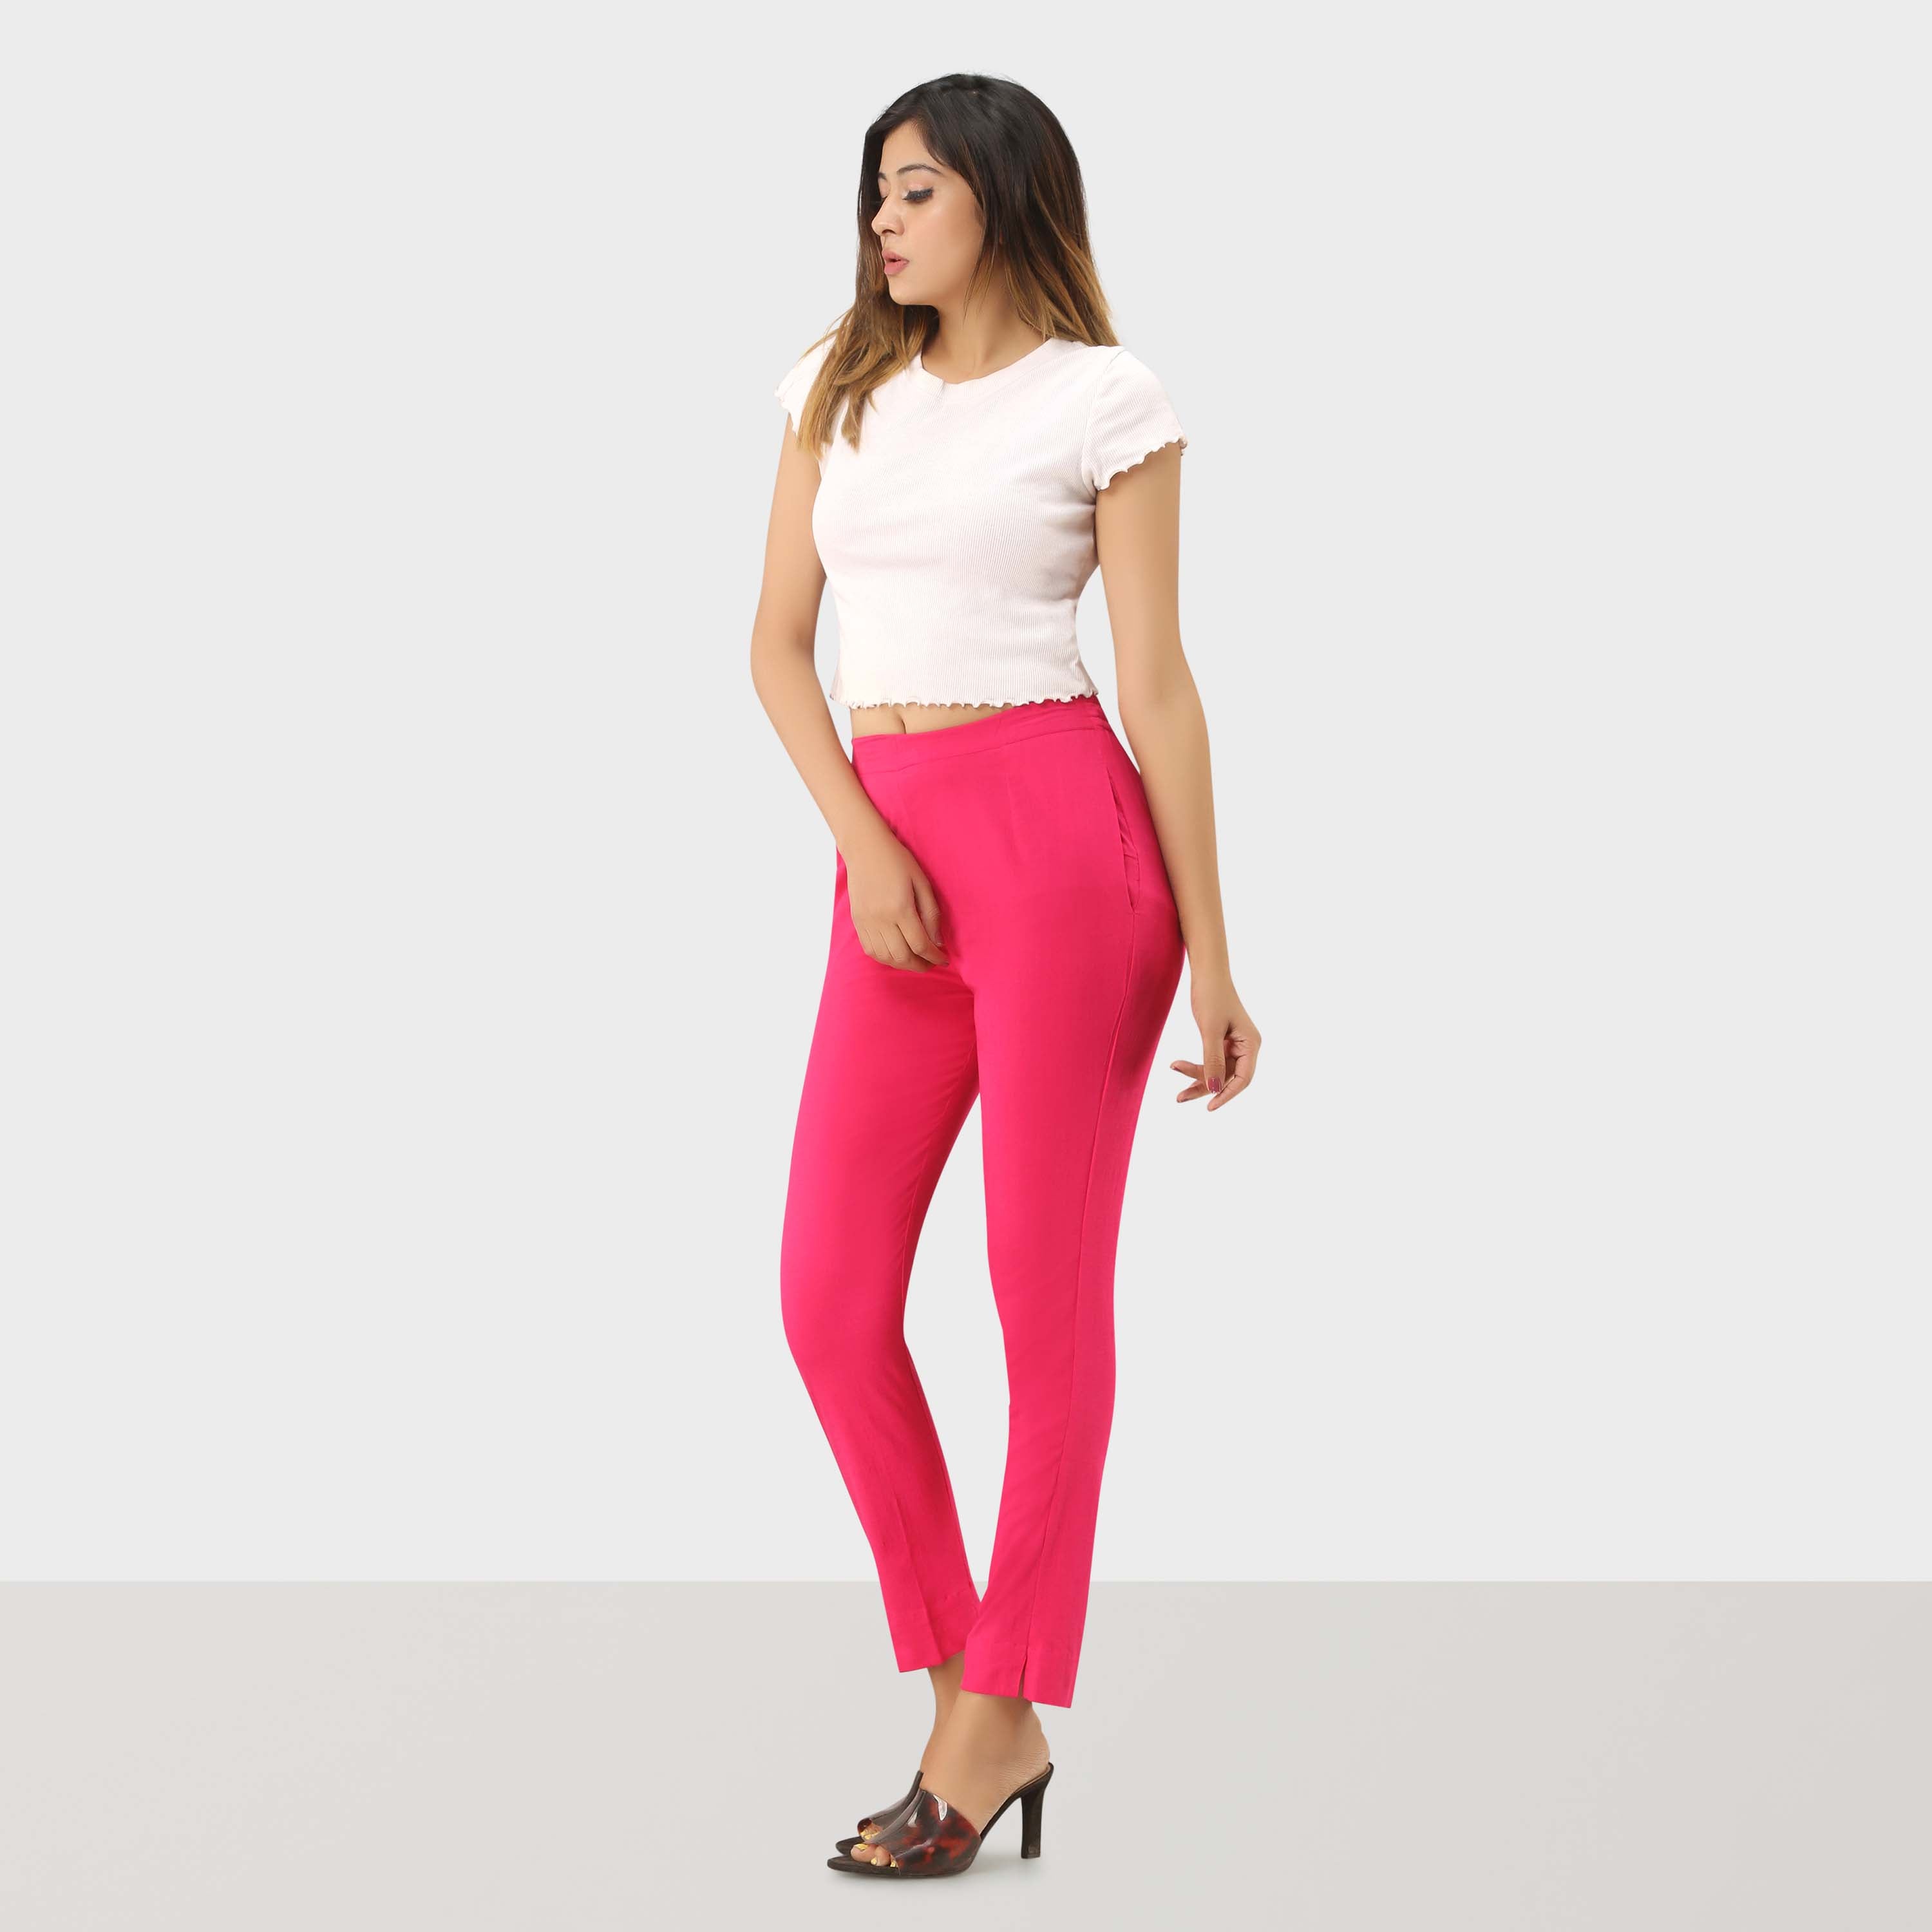 & Other Stories tailored pants in hot pink - part of a set | ASOS